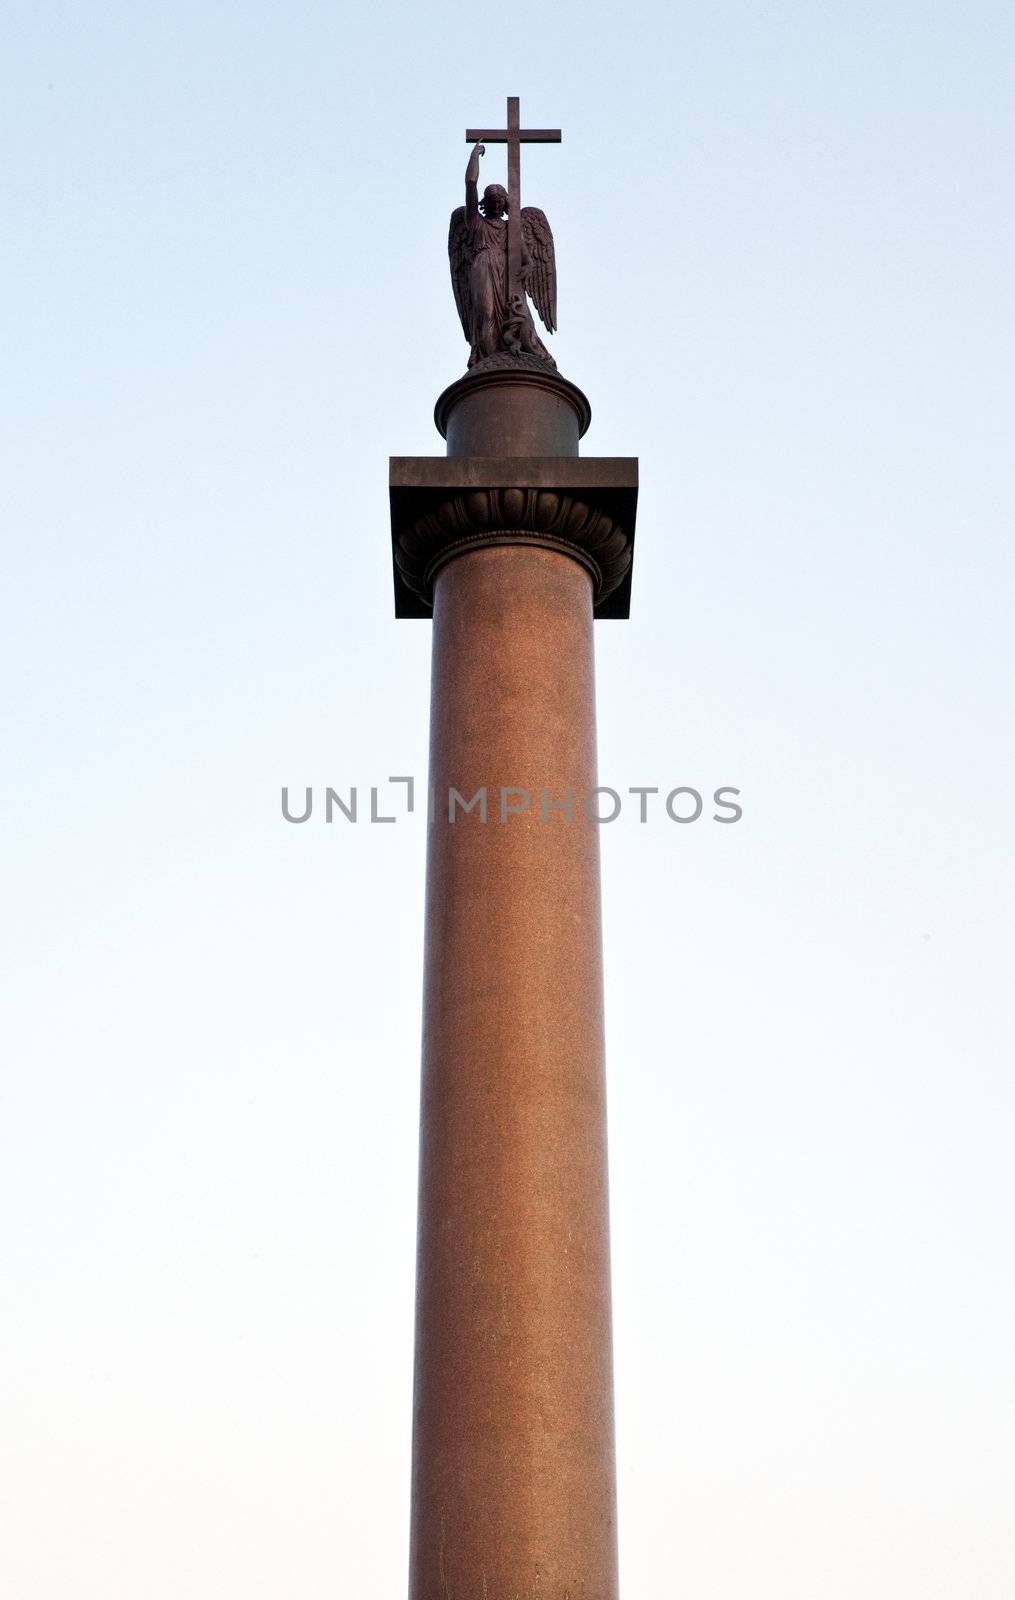 Alexander Column, Palace Square in St Petersburg.